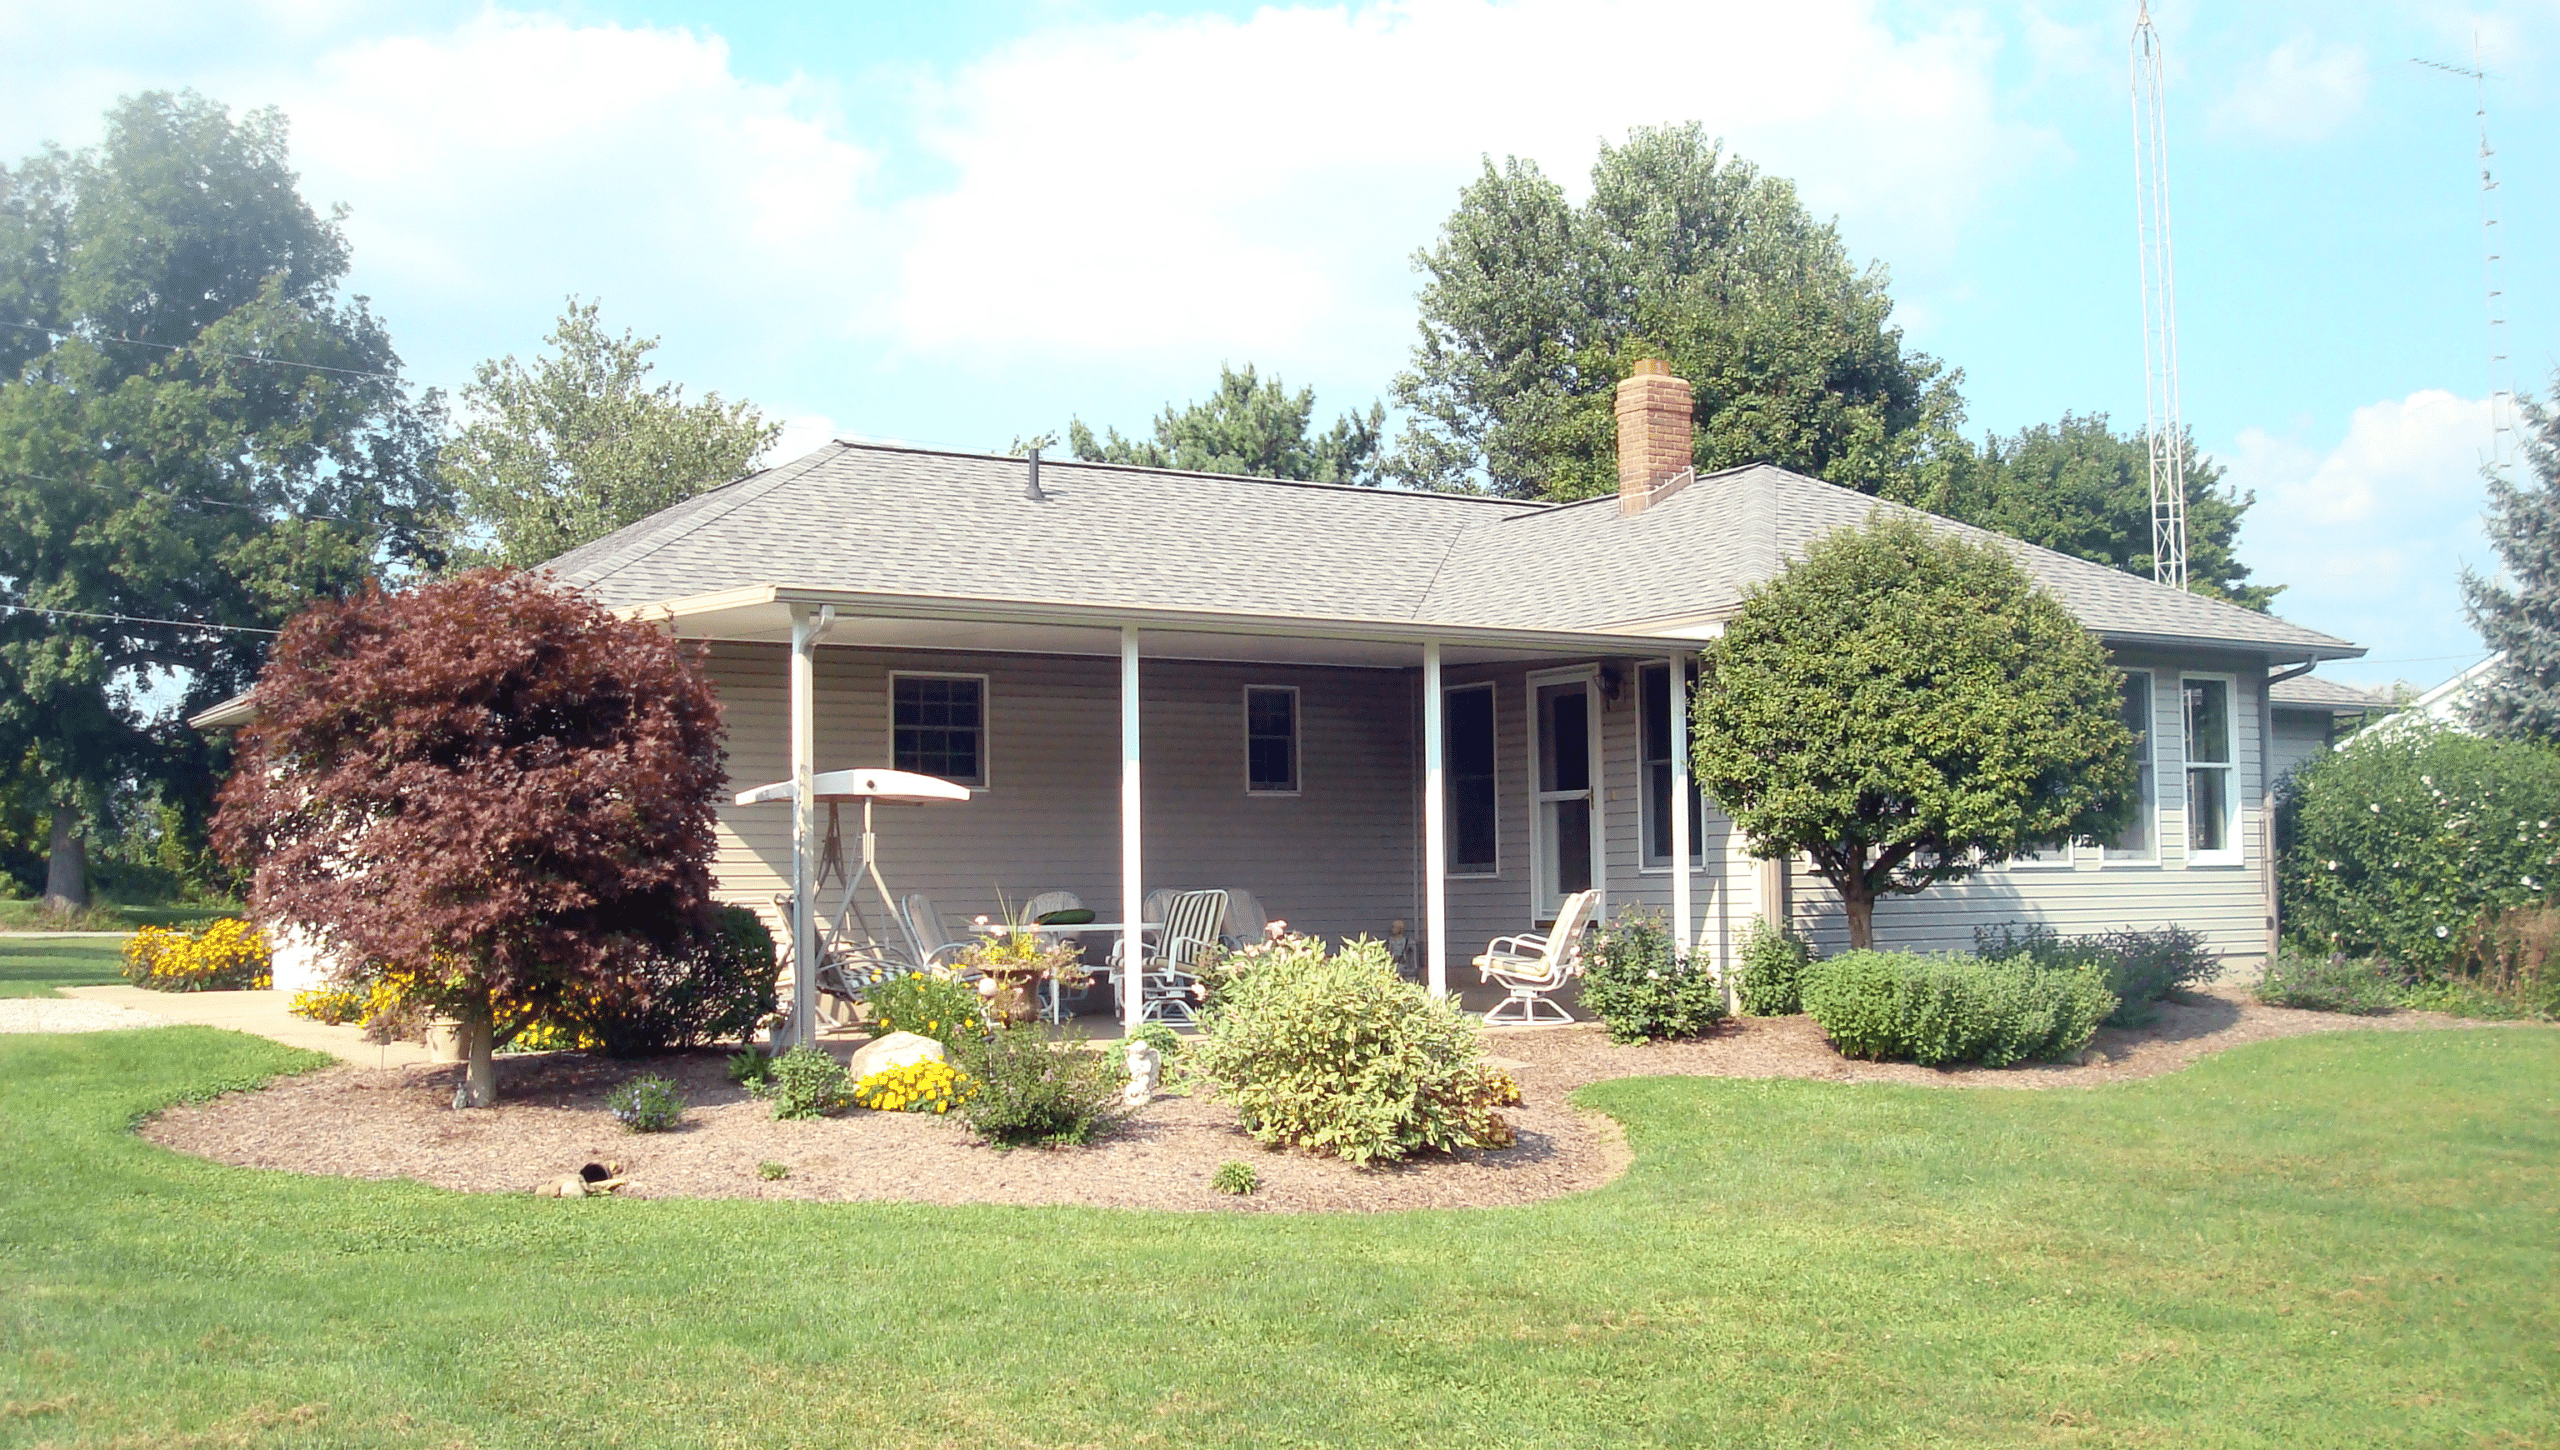 Patio cover and front yard of home